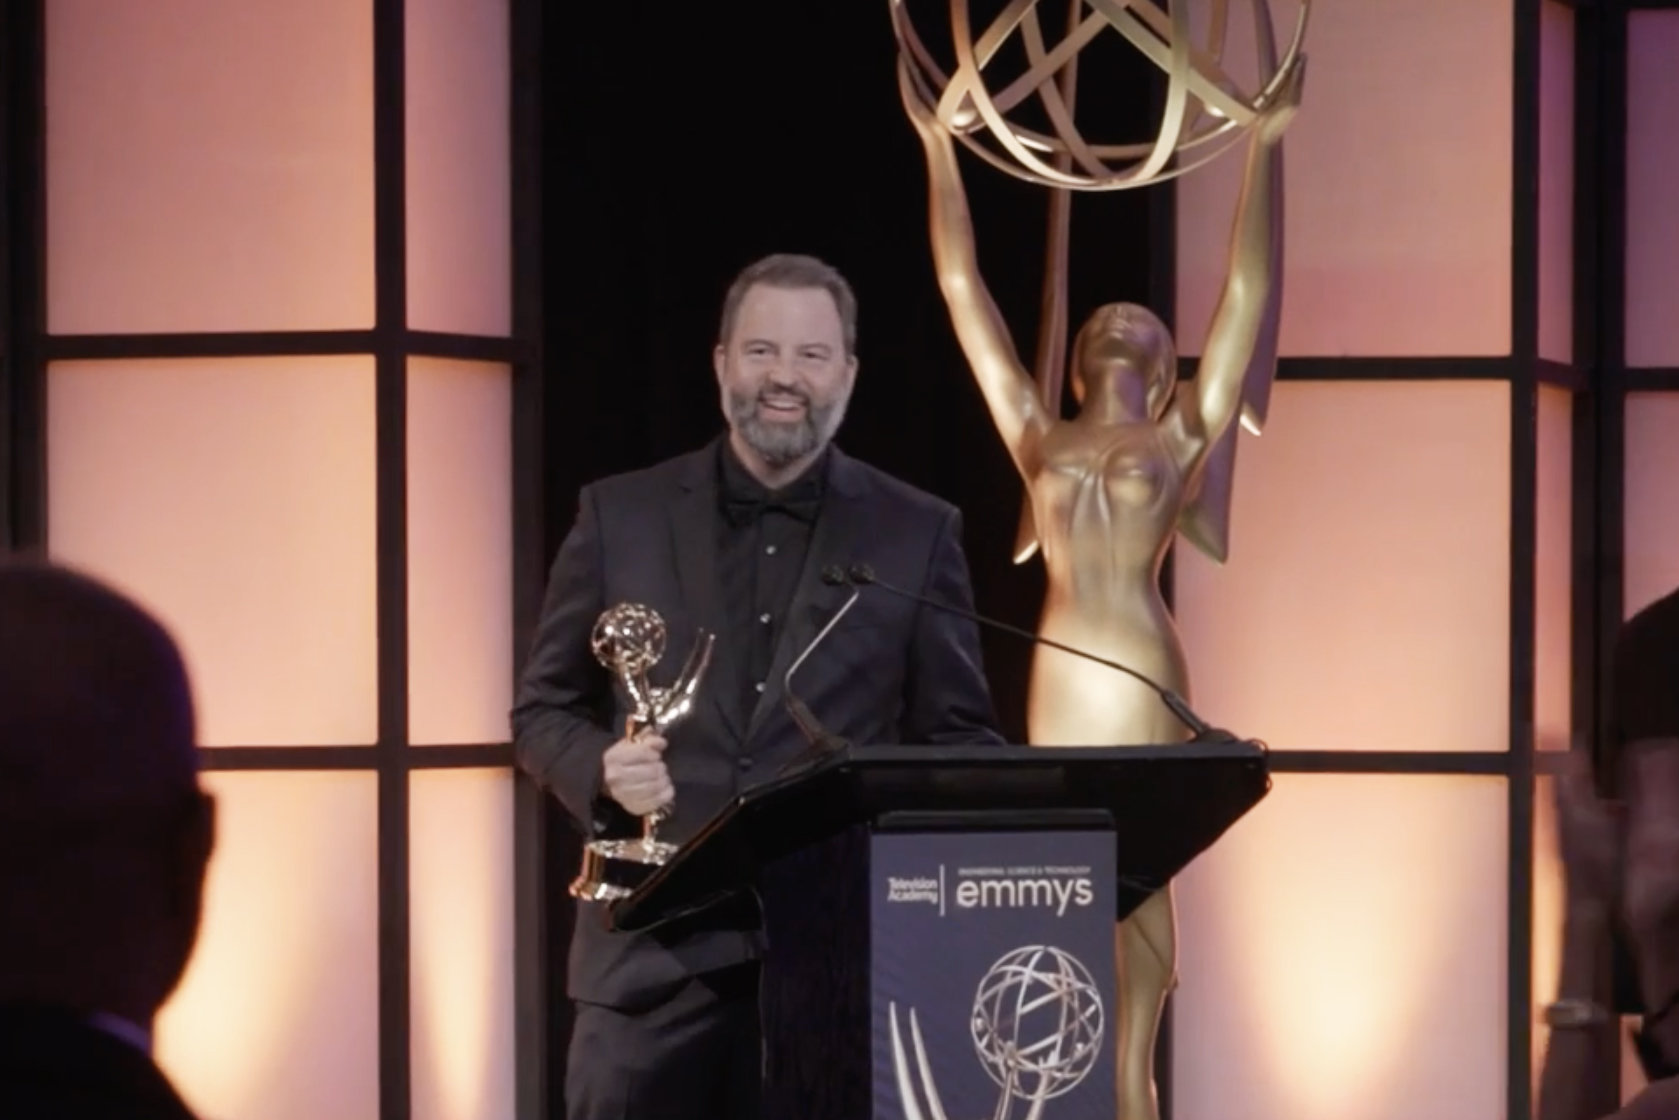 Paul Debevec accepting his Emmy onstage at the Emmy Awards